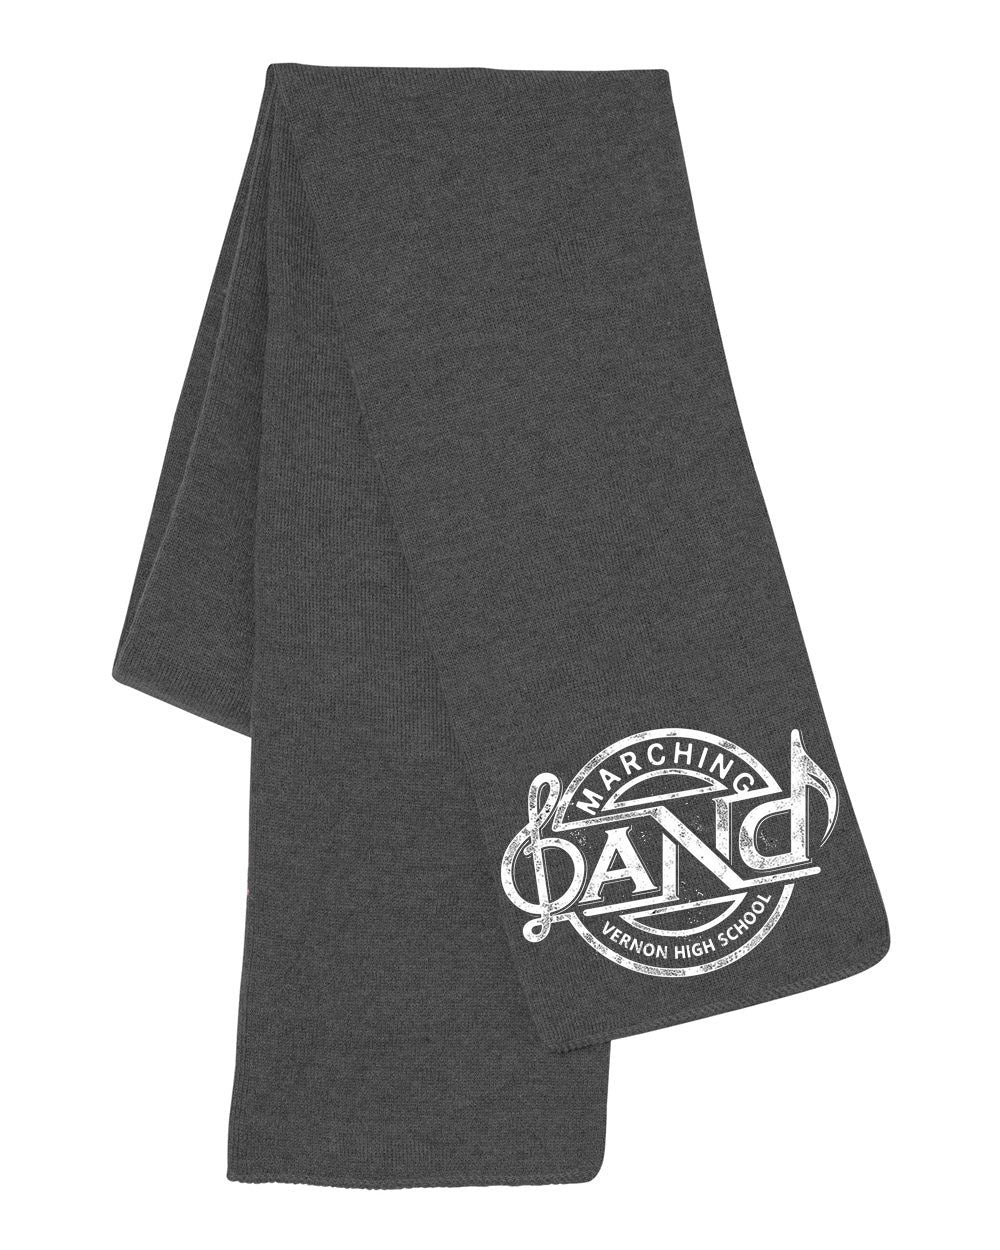 Vernon Marching Band design 1 Scarf